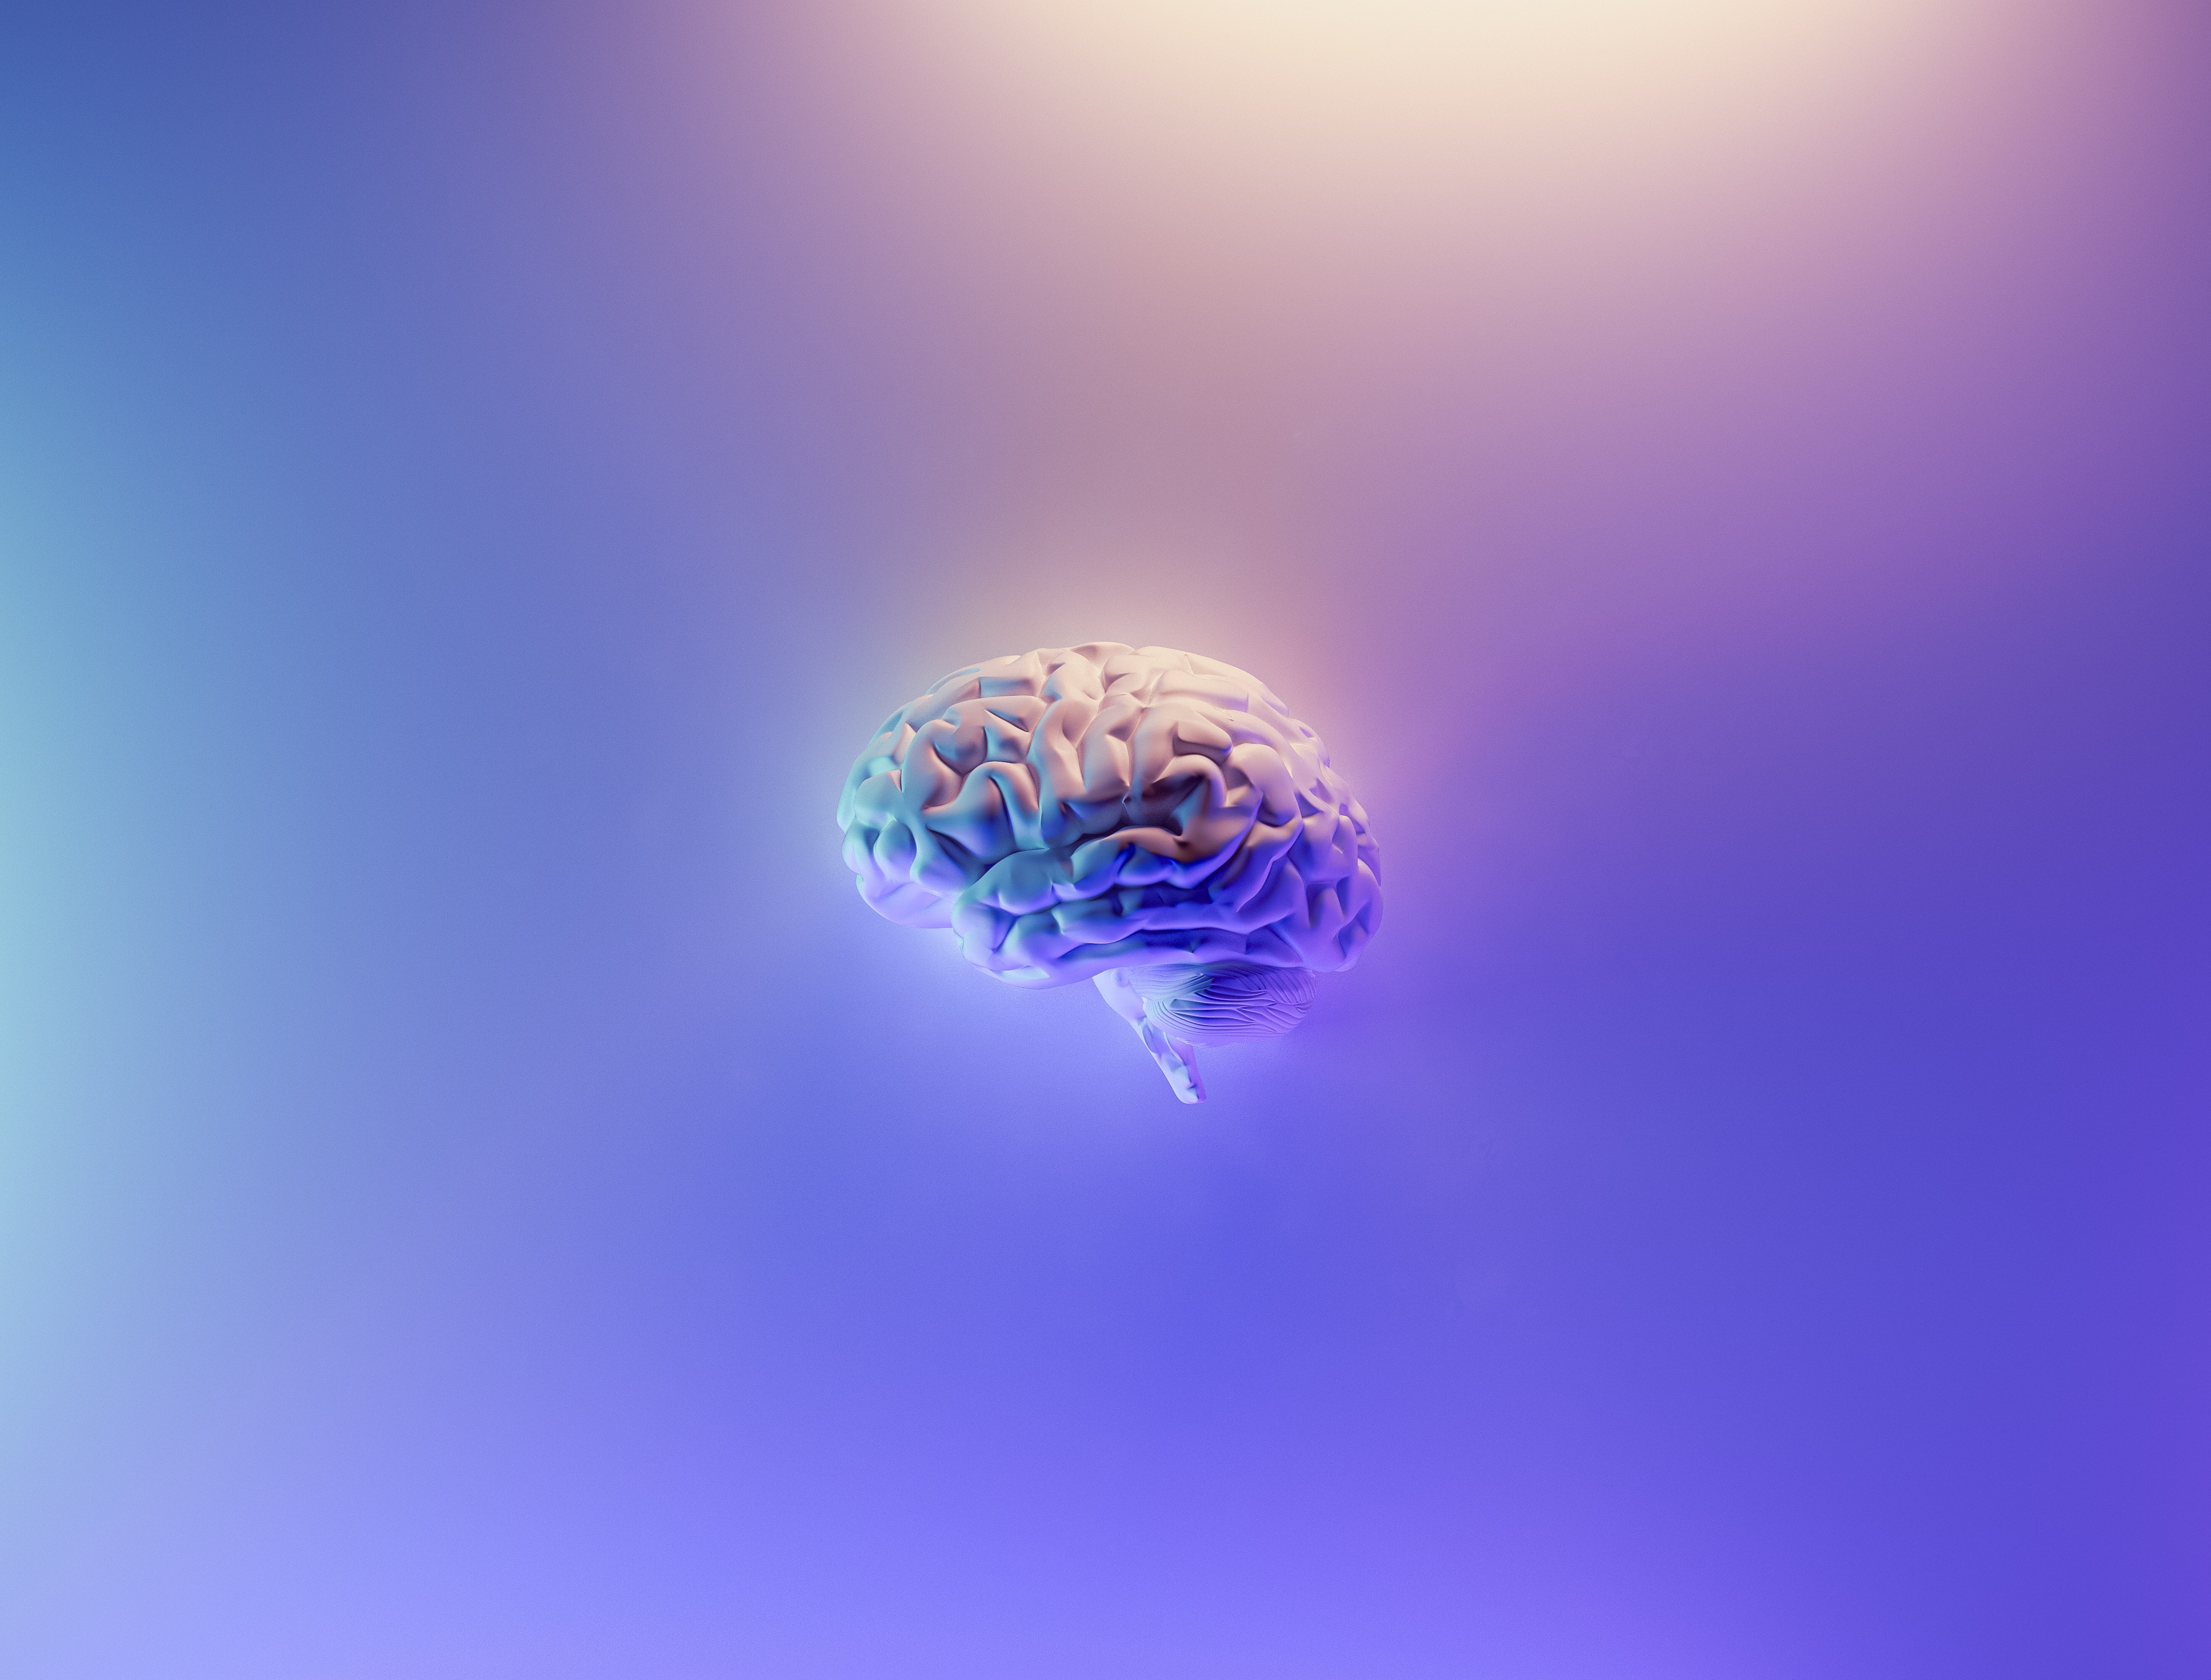 A brain floats in the center of an abstract-colored background.